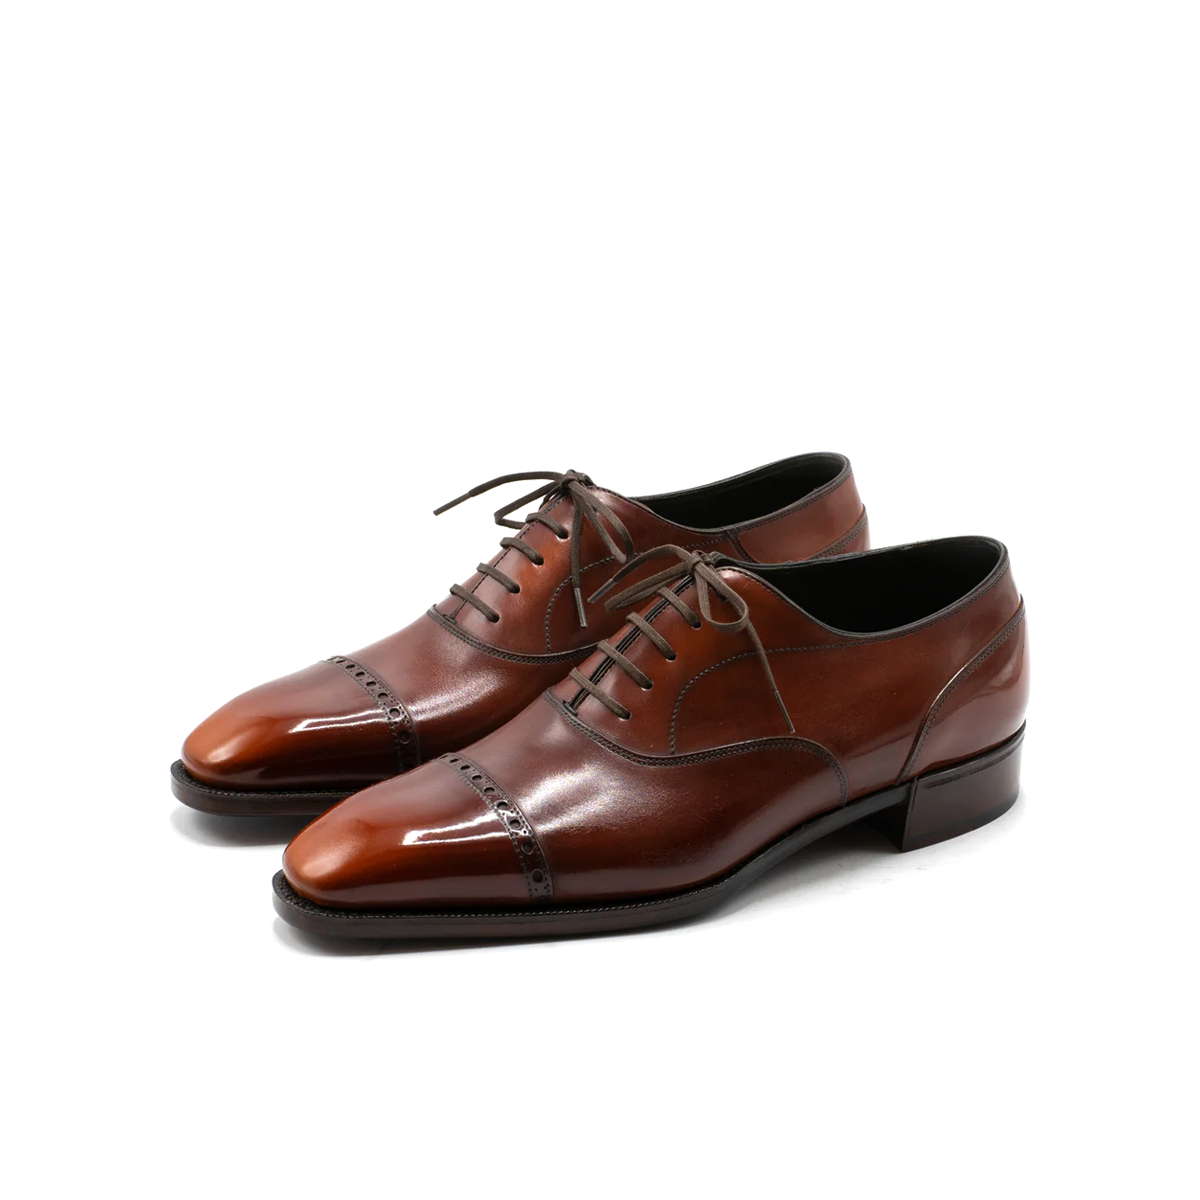 Seraphina Spectators Oxford Shoes